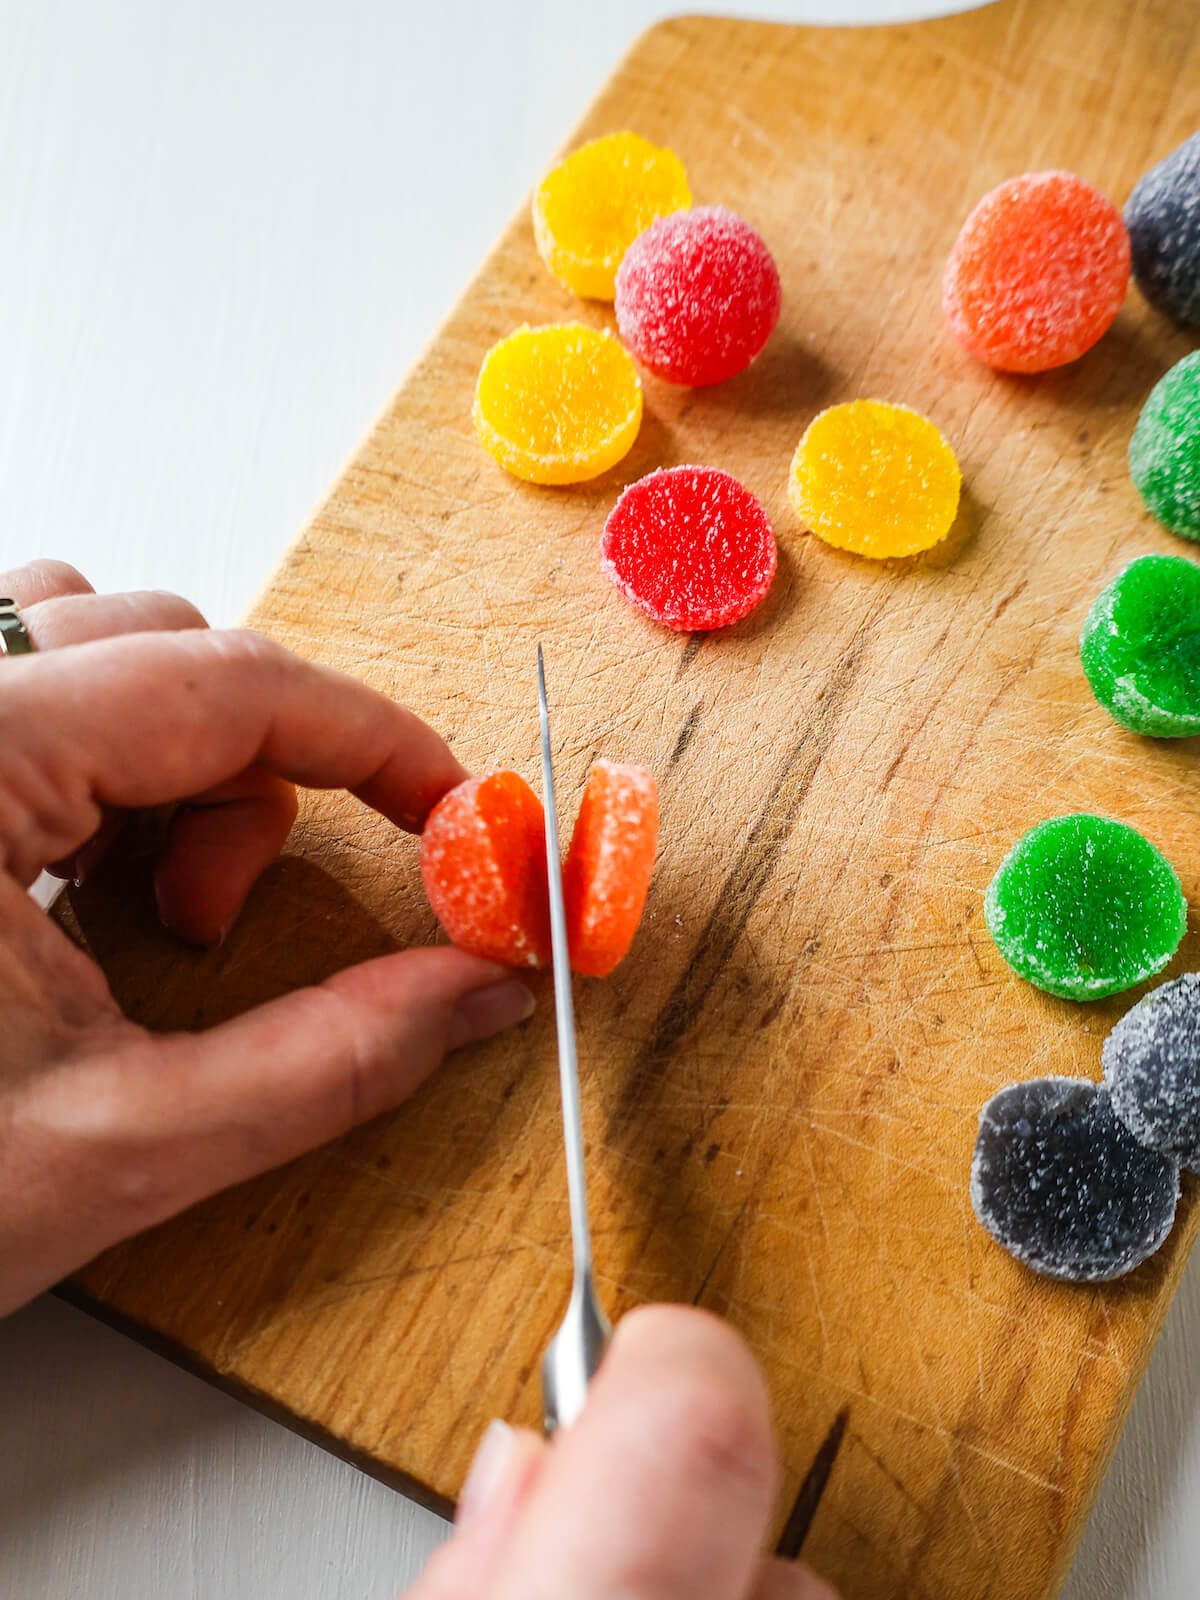 Cutting a large gumdrop in slices to use as candy eyes on cupcakes.